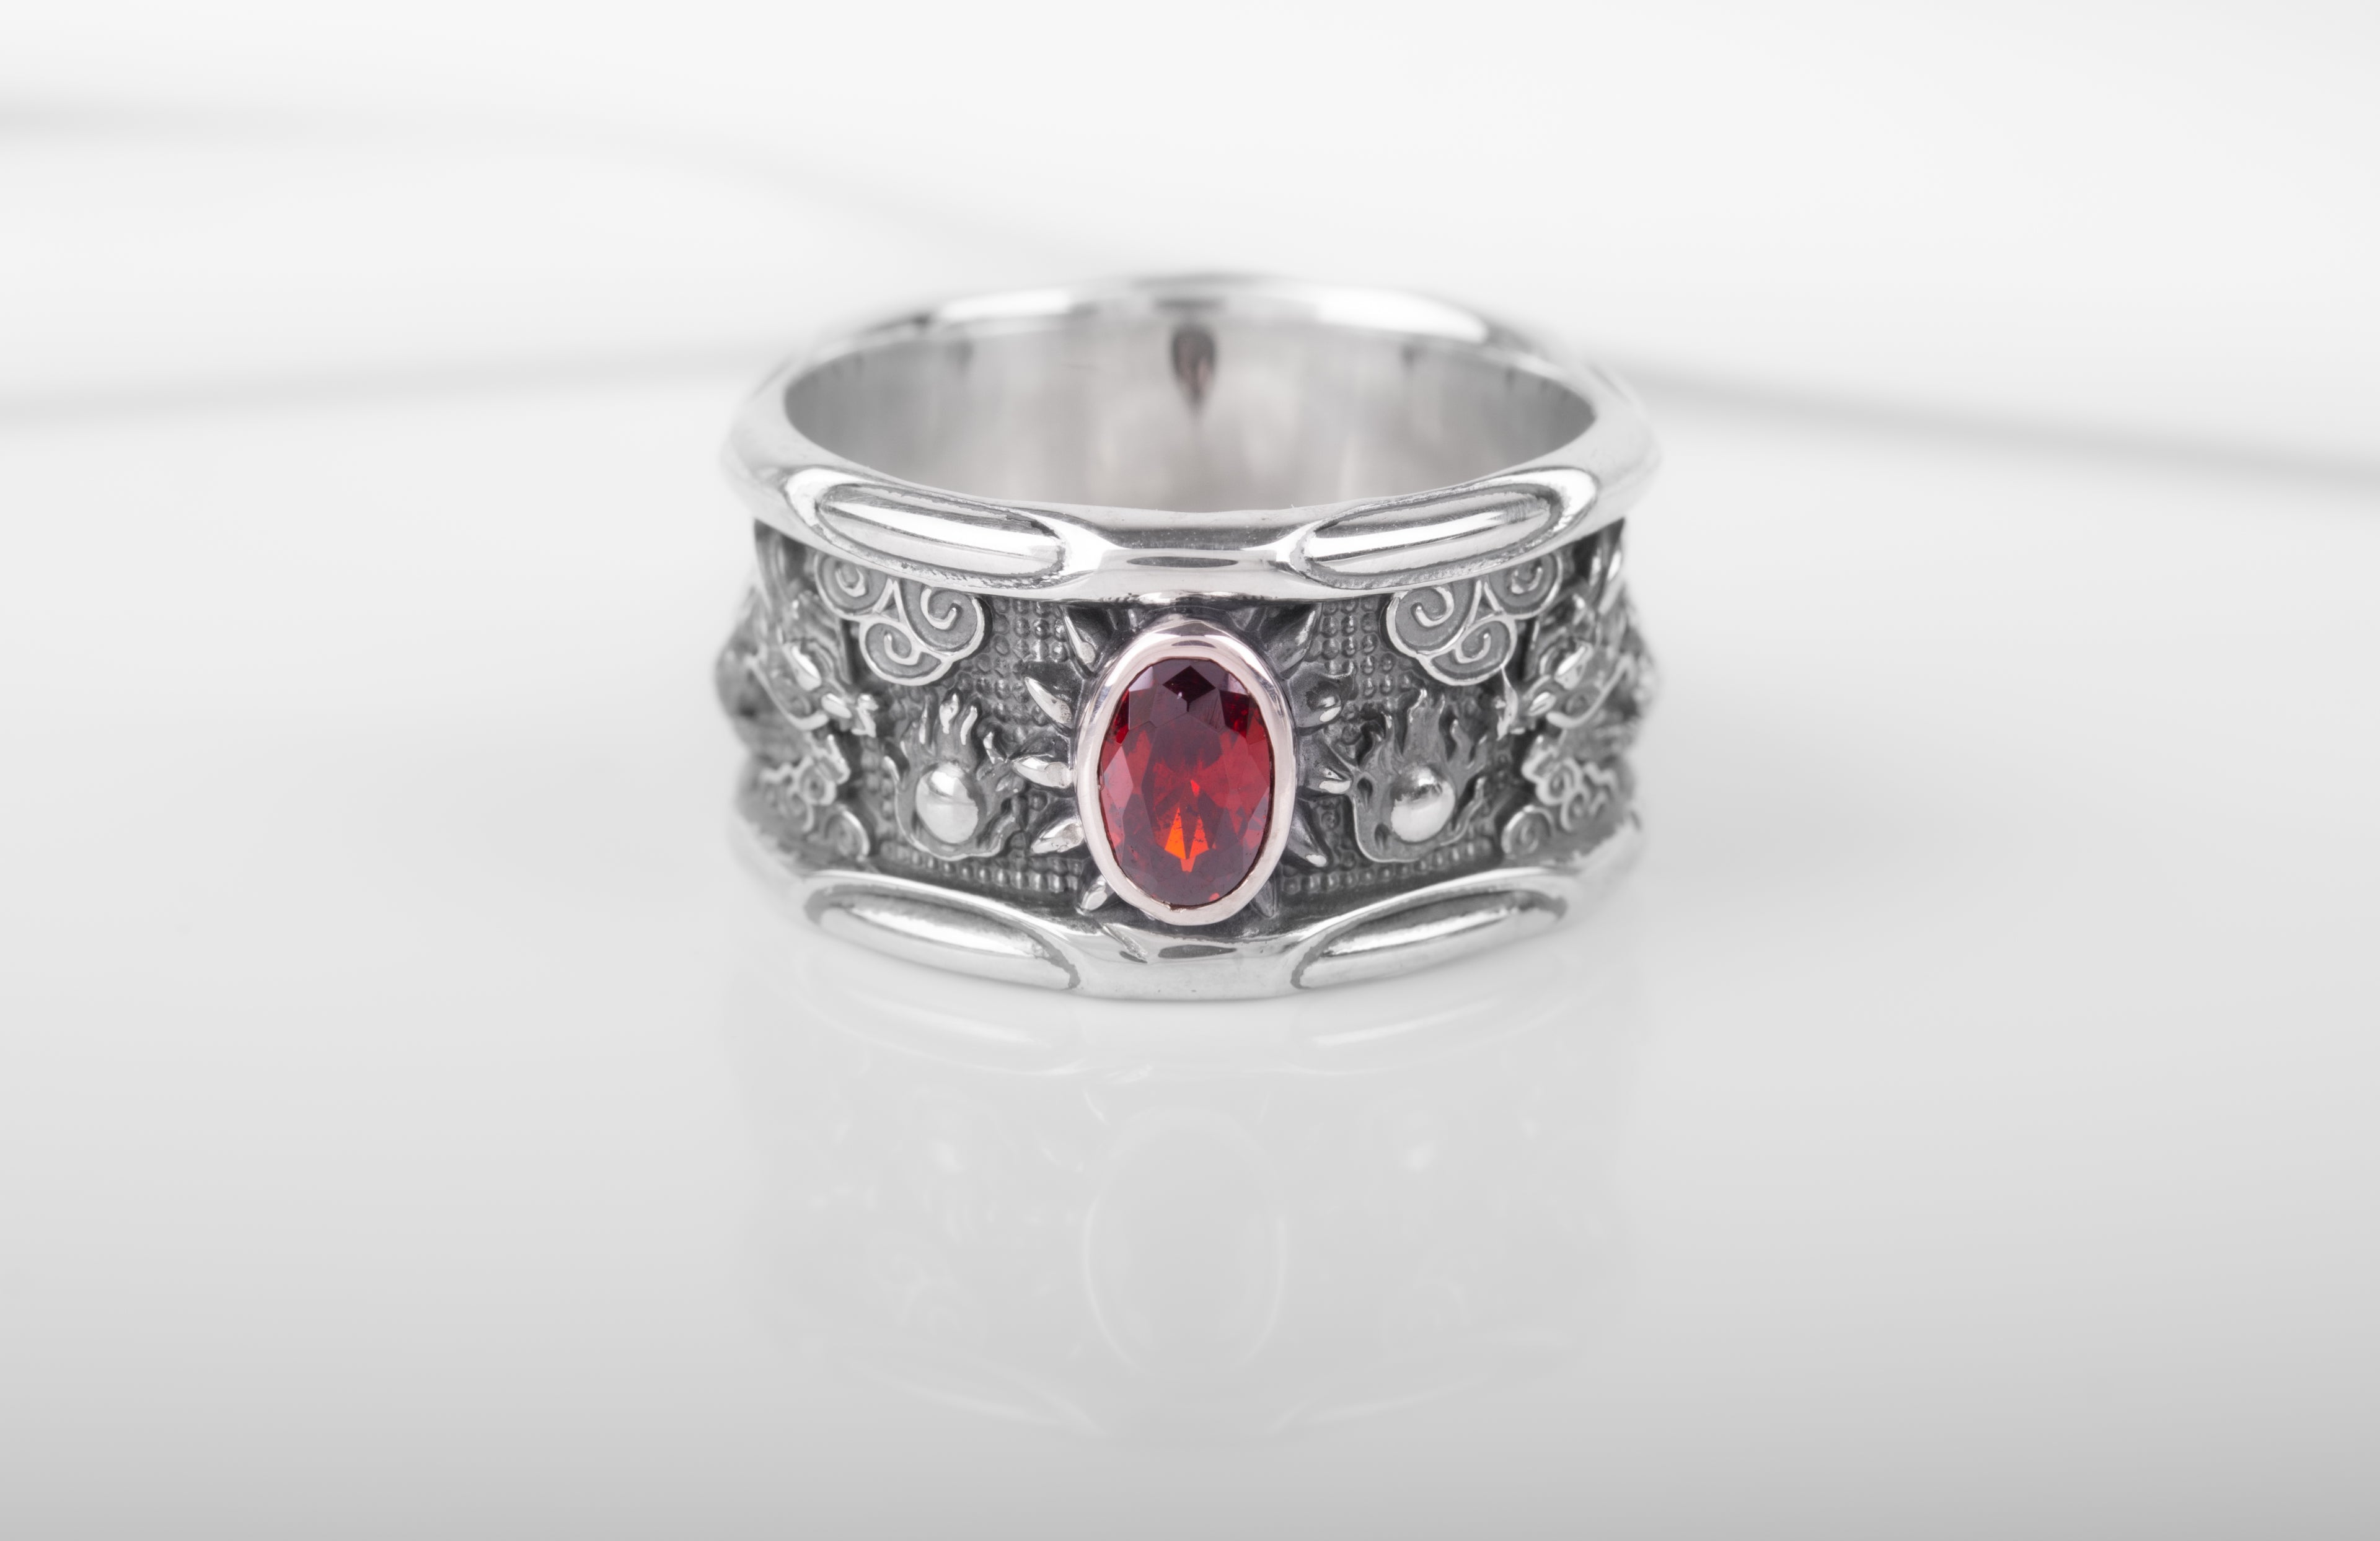 925 Silver Asian Style Dragon Ring with Red Gem